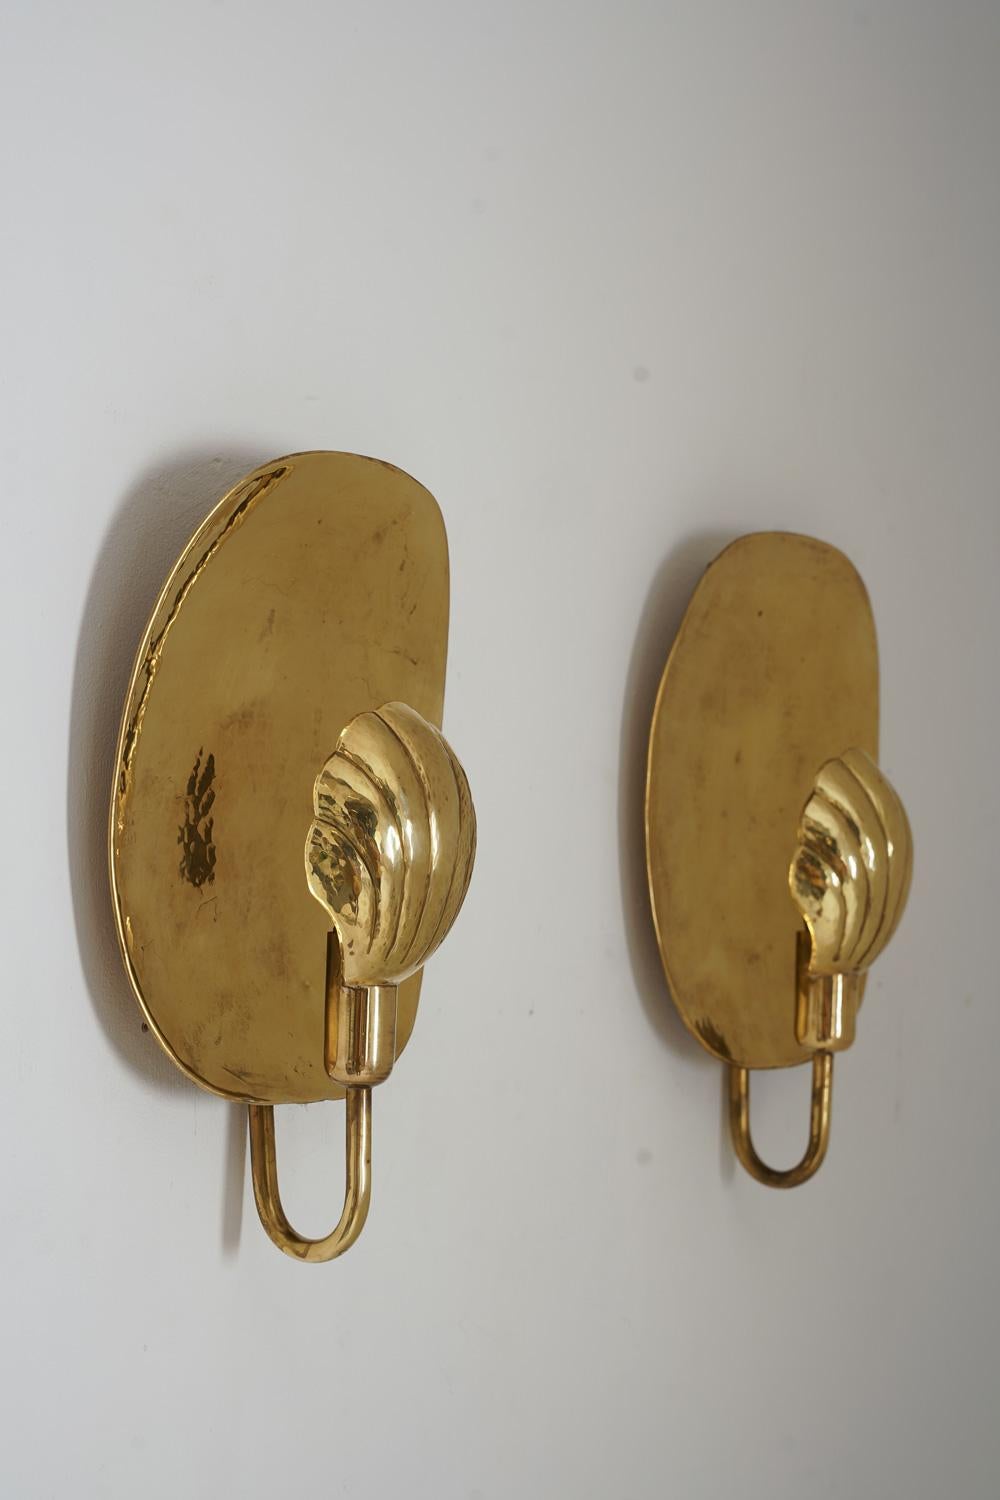 A pair of wall lights in brass by Lars Holsmtröm, Sweden.
Tha lamps consist of a hammered brass back plate and a light source (E-14), hidden by a sea shell-shaped reflector.
Lars Holmström is known as being one of the most skilled blacksmiths at the